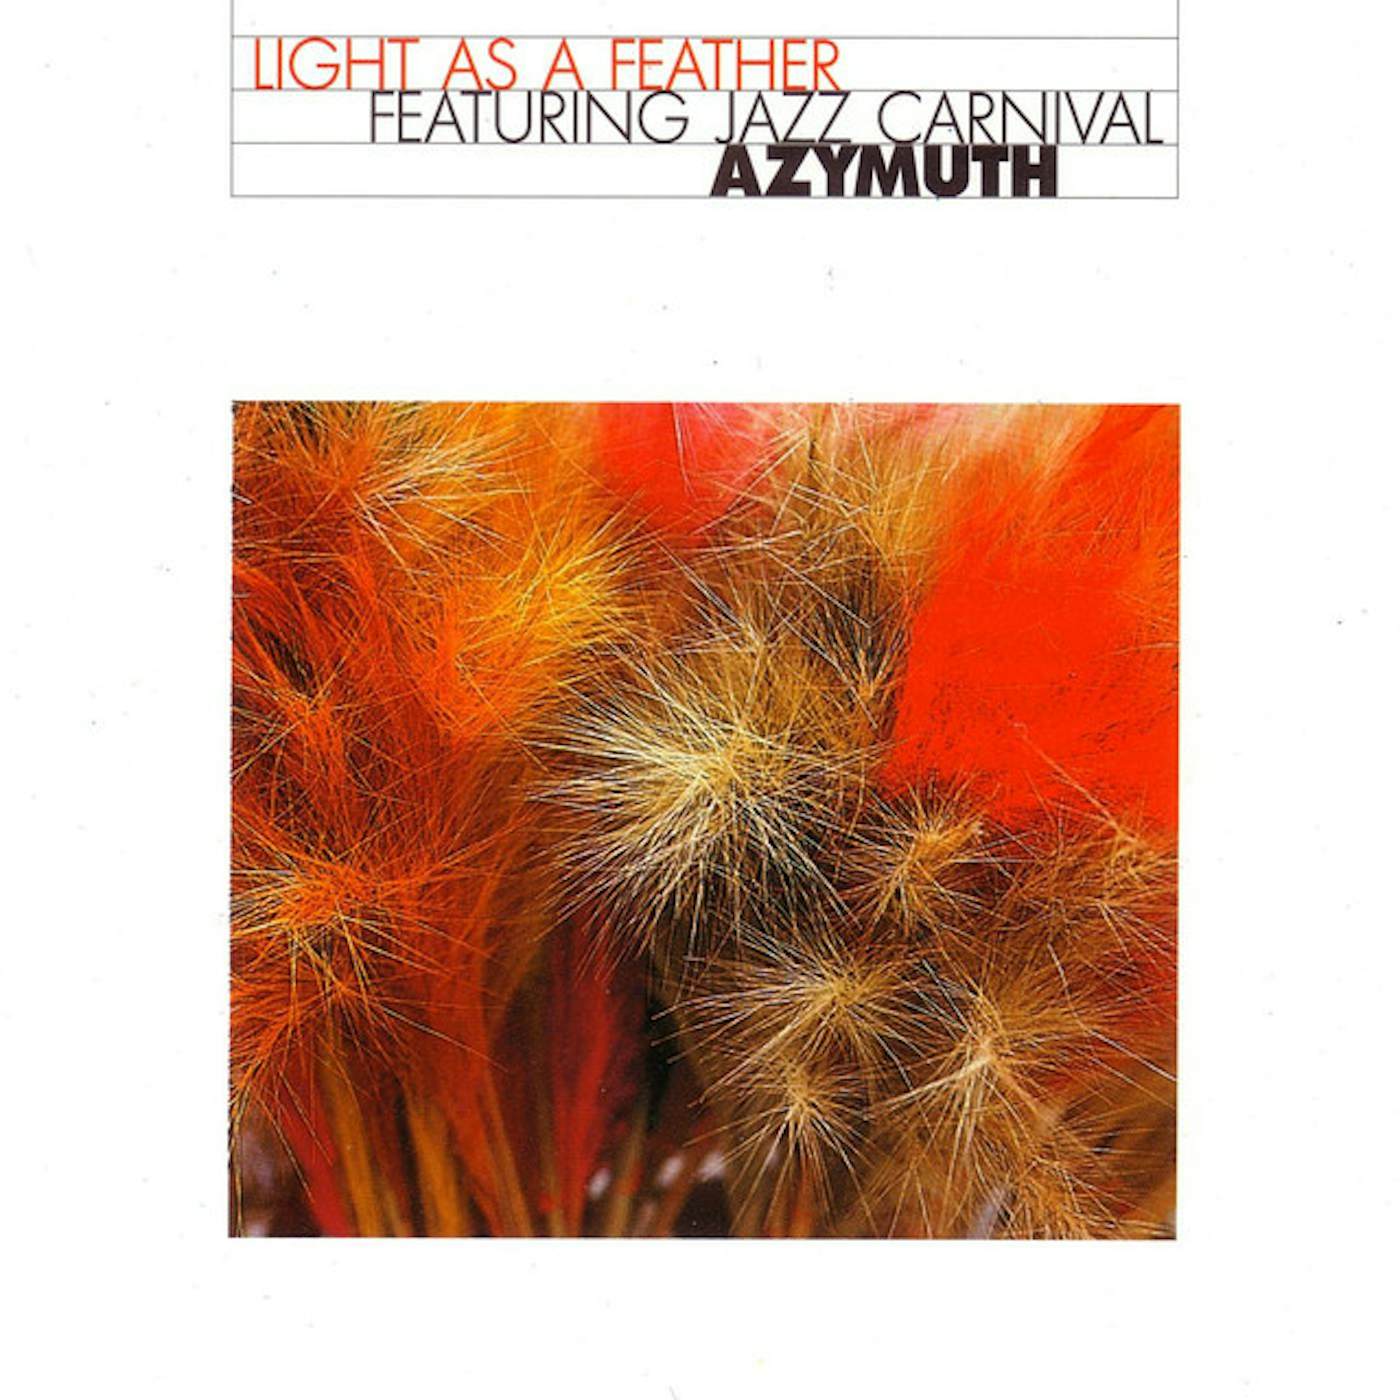 Azymuth Light As A Feather Vinyl Record